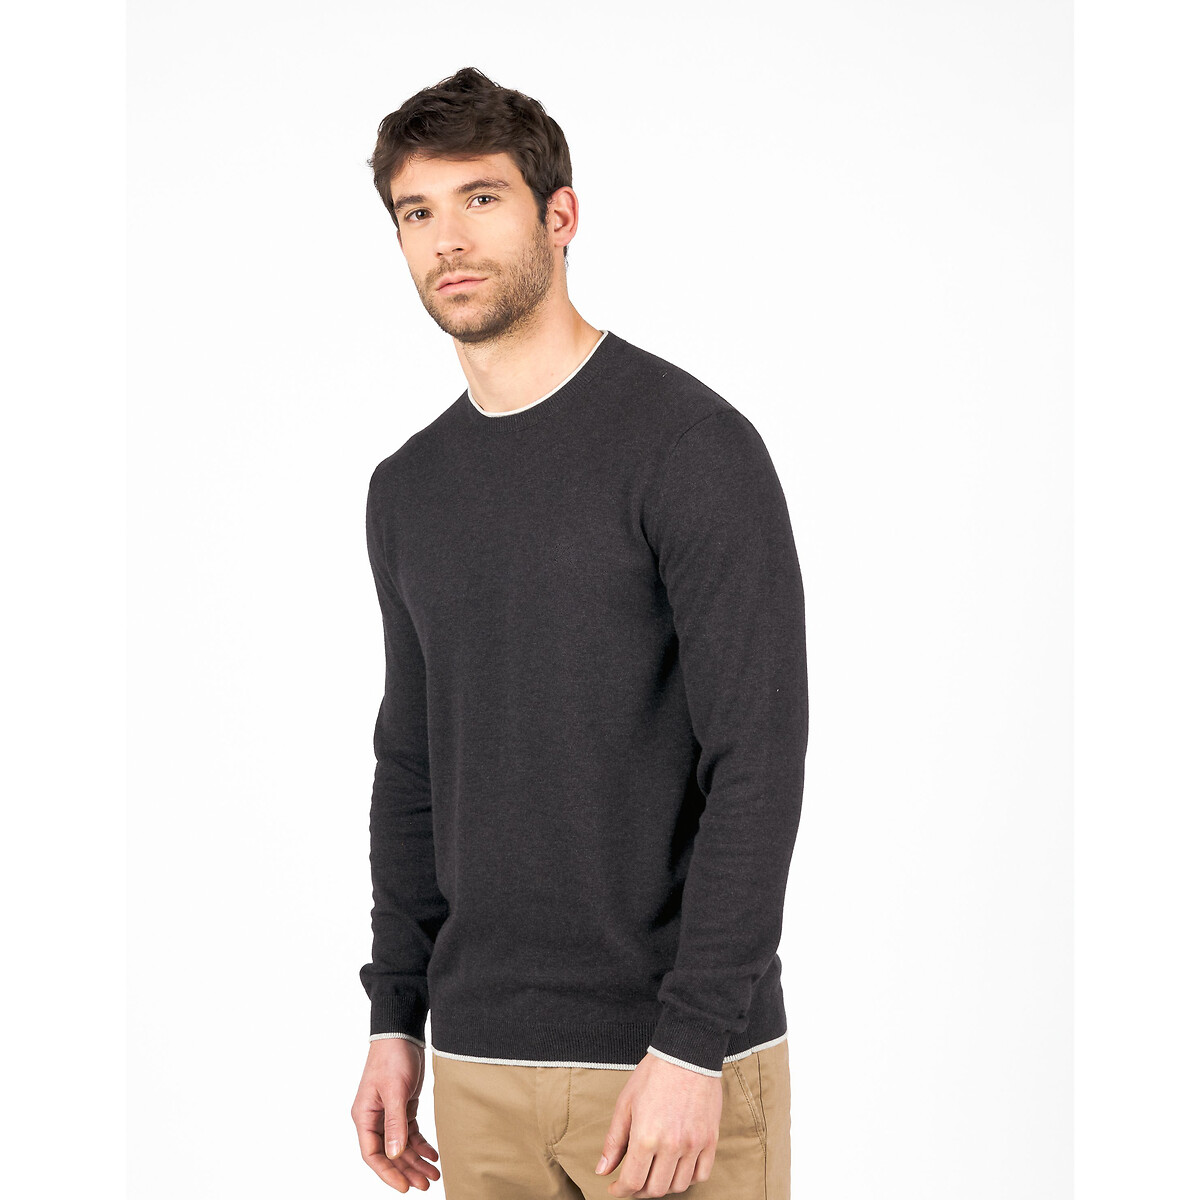 Cotton essential jumper with crew neck , black marl, Oxbow | La Redoute